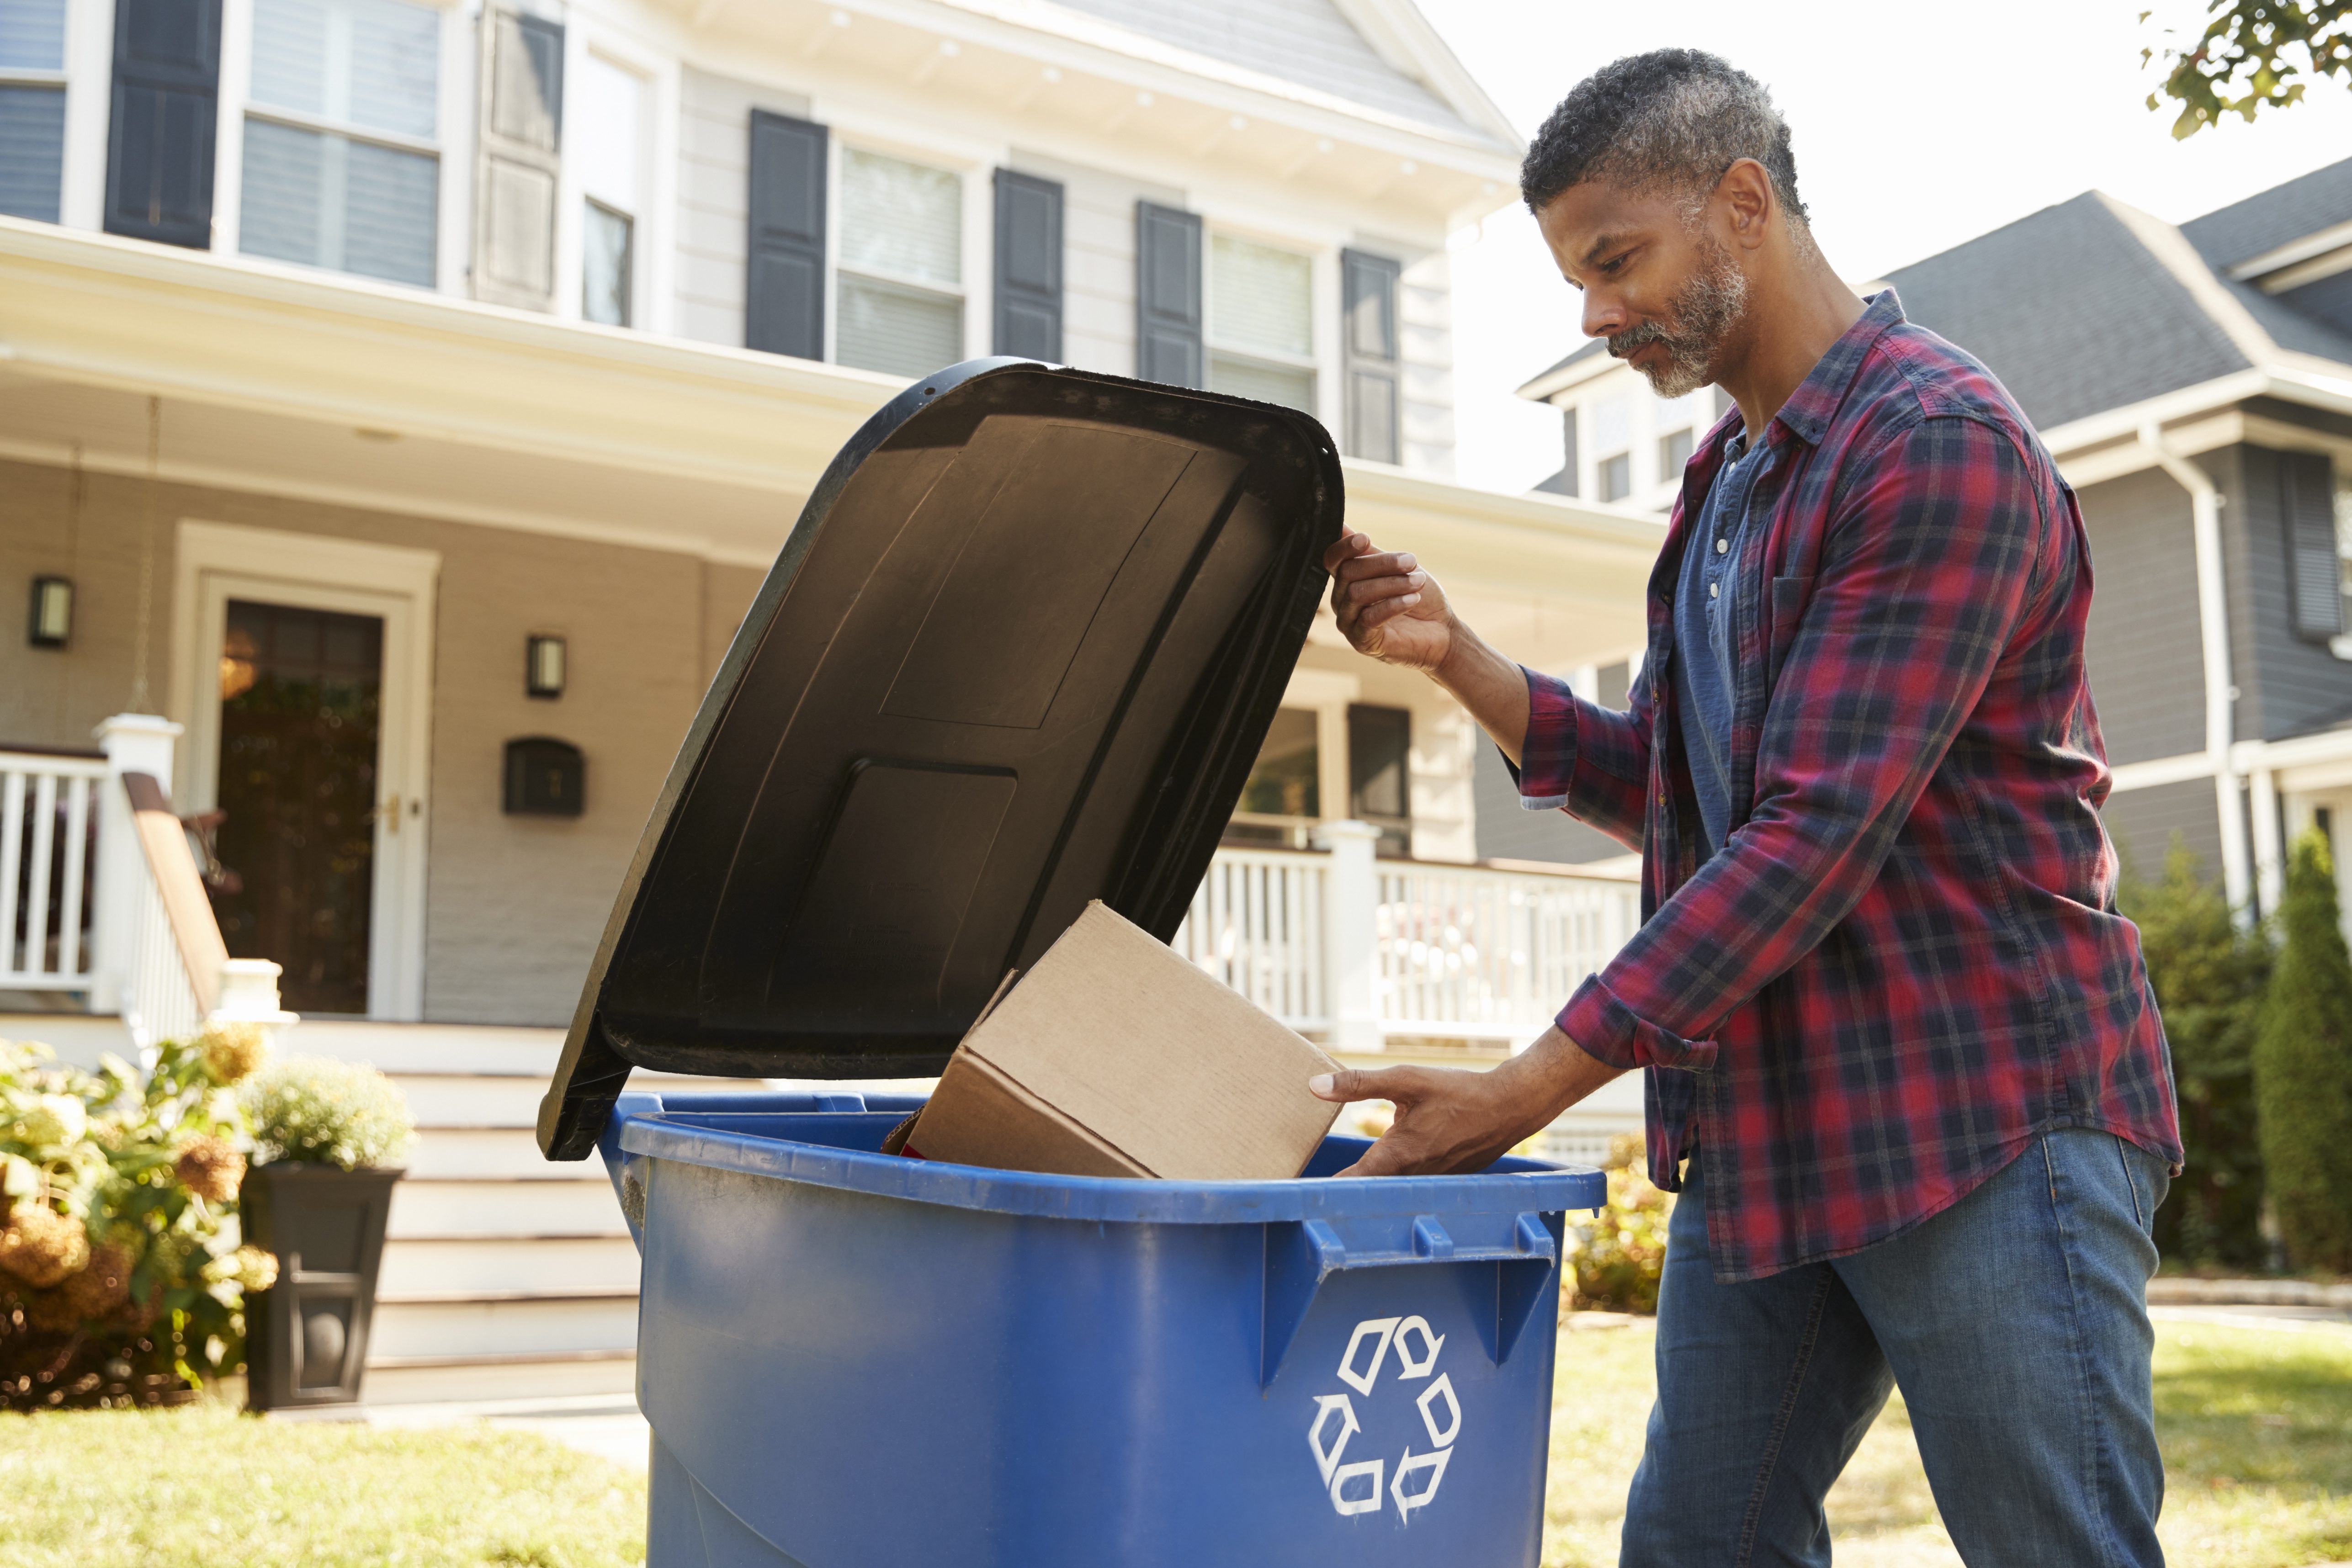 Man throwing box into a recycle bin